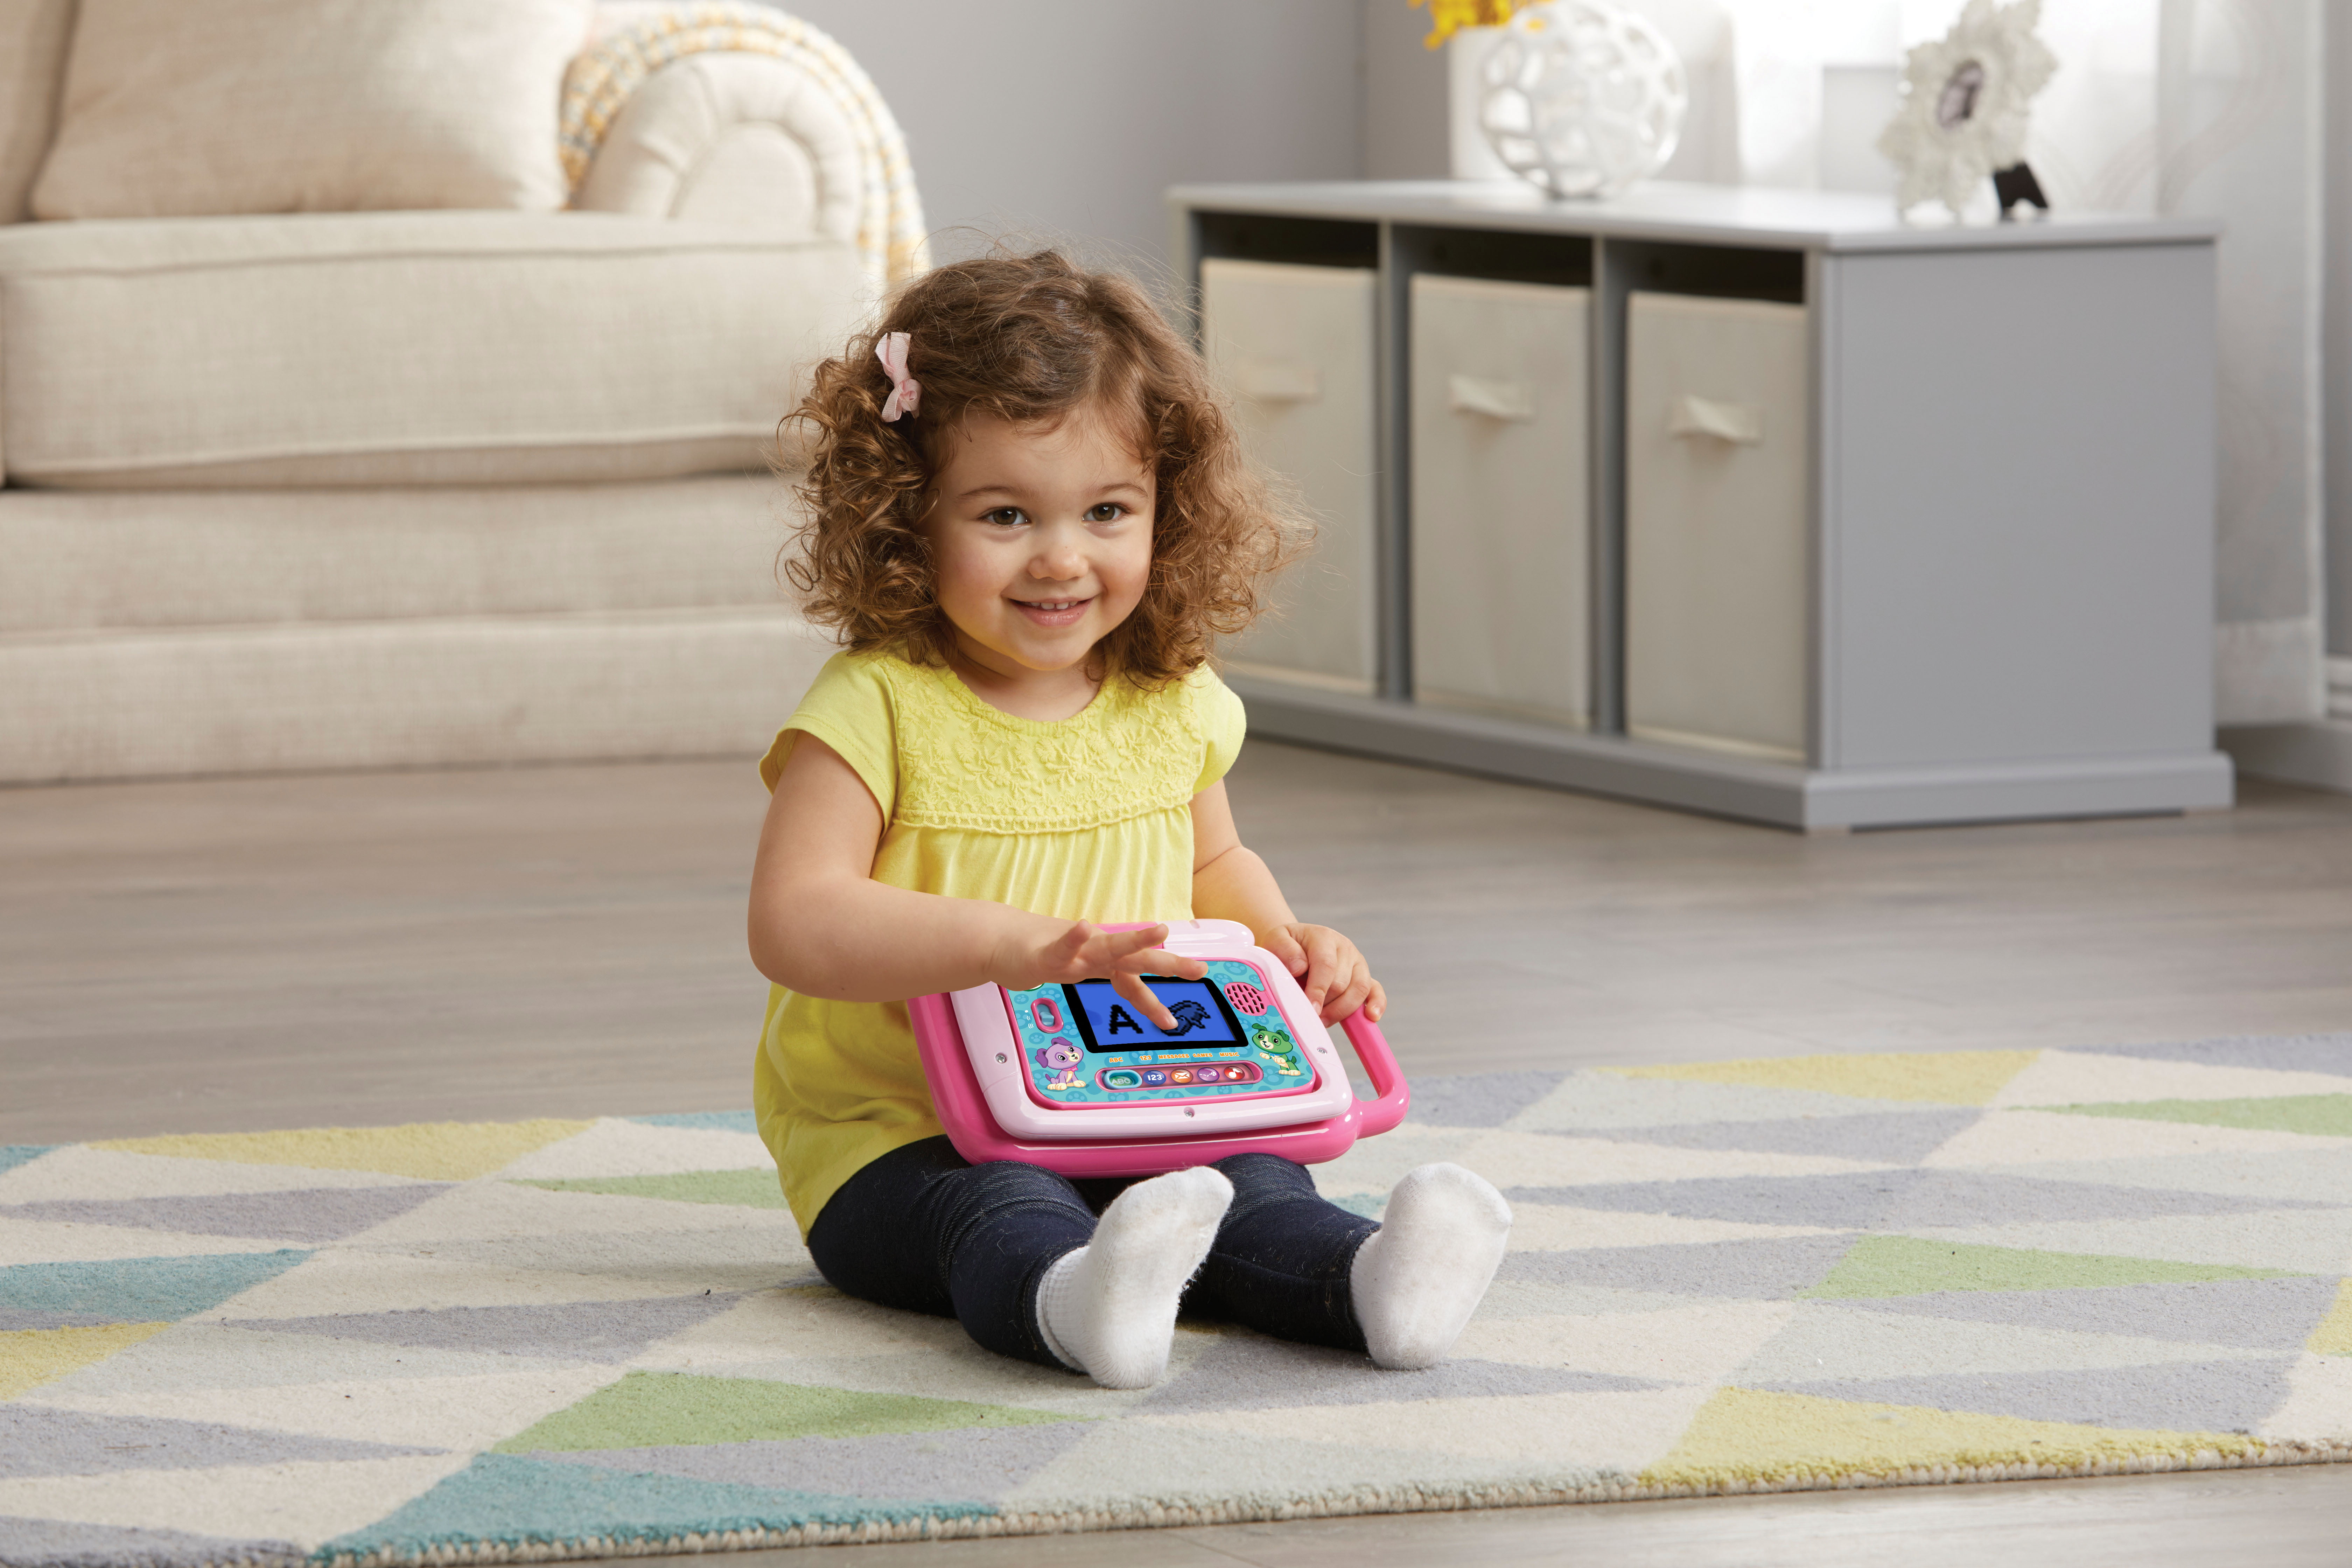 LeapFrog 2-in-1 LeapTop Touch for Toddlers, Electronic Learning System, Teaches Letters, Numbers - image 4 of 12